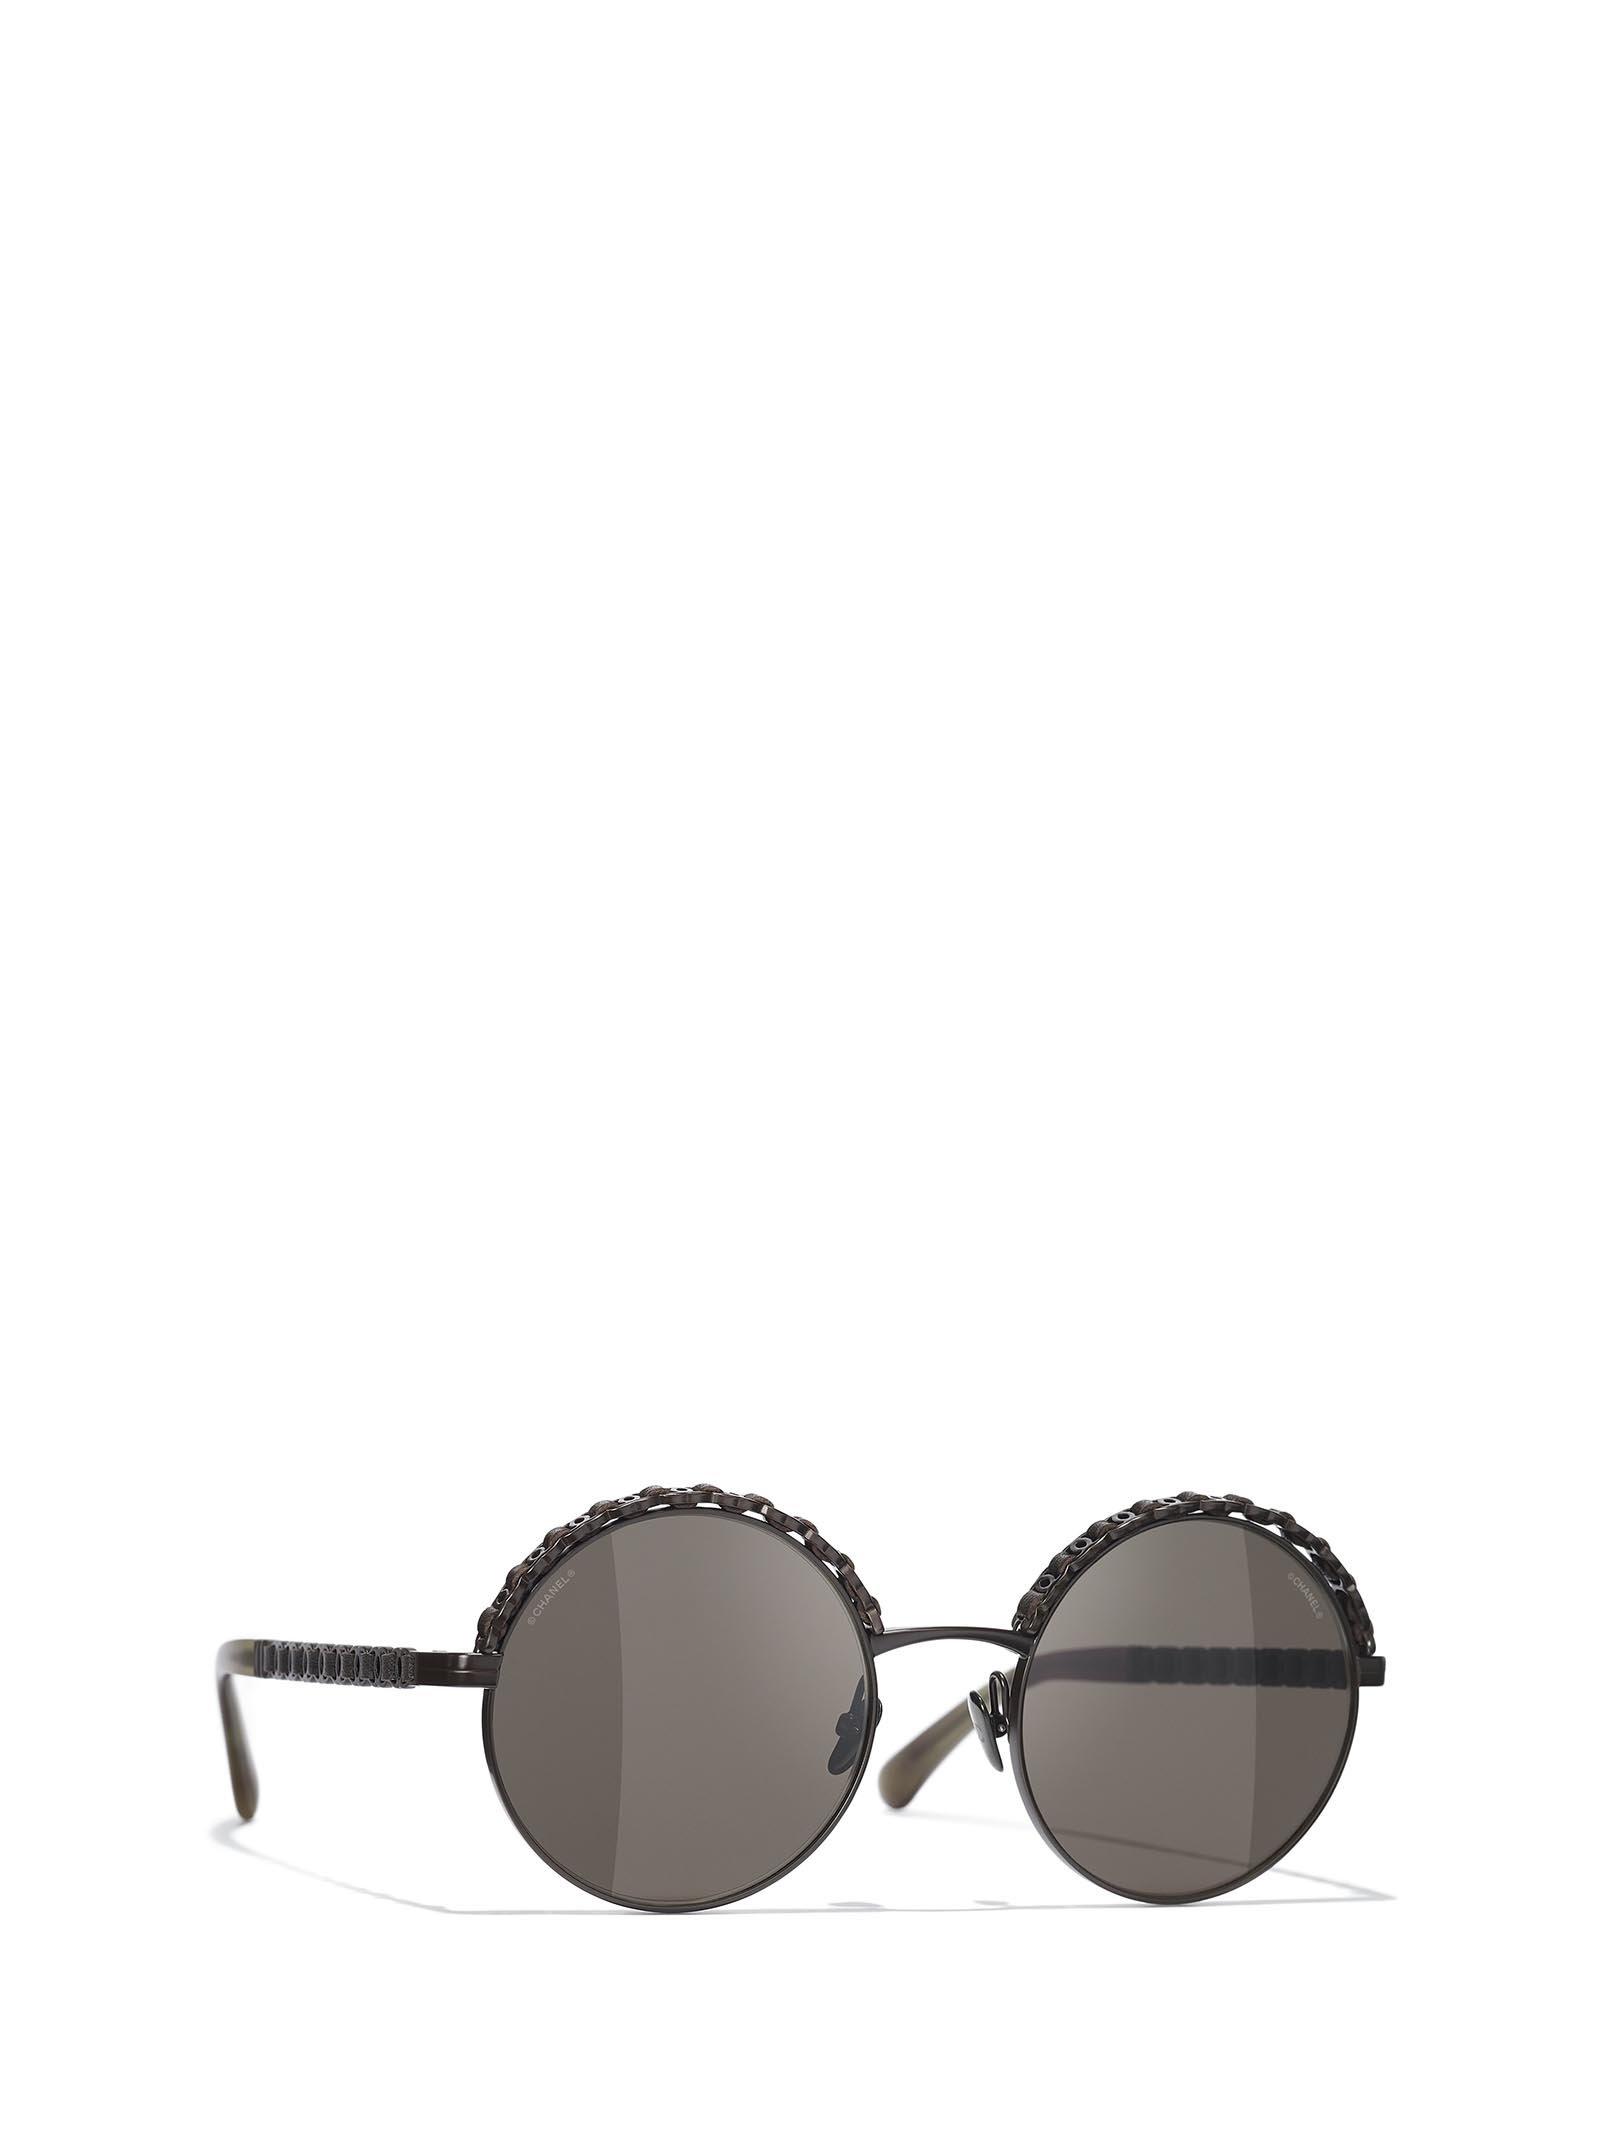 Chanel Round Frame Sunglasses in Black | Lyst